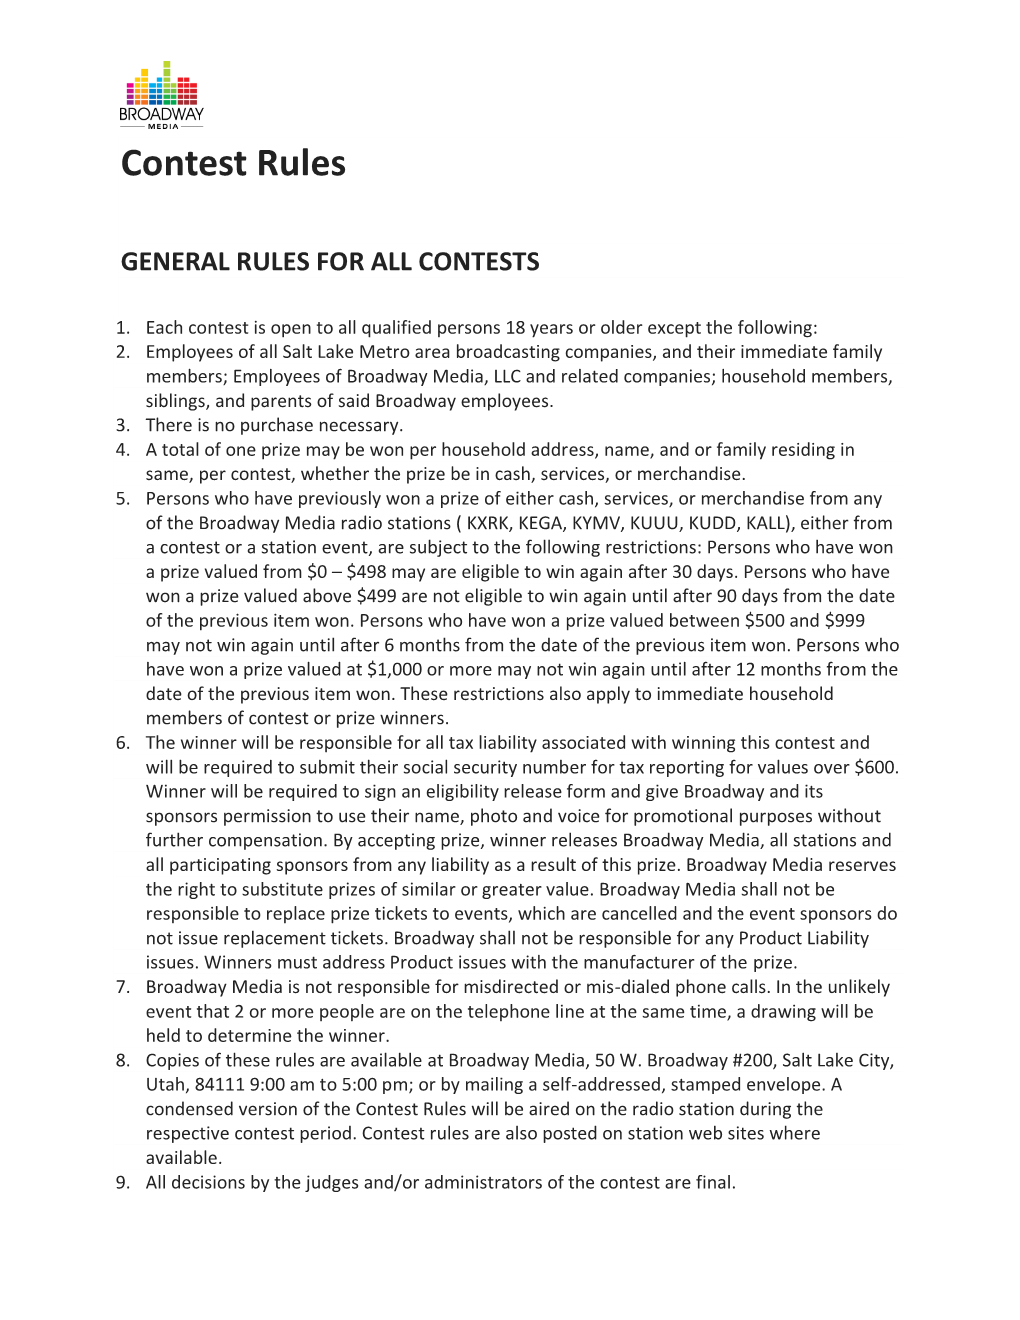 Broadway Media's General Contest Rules